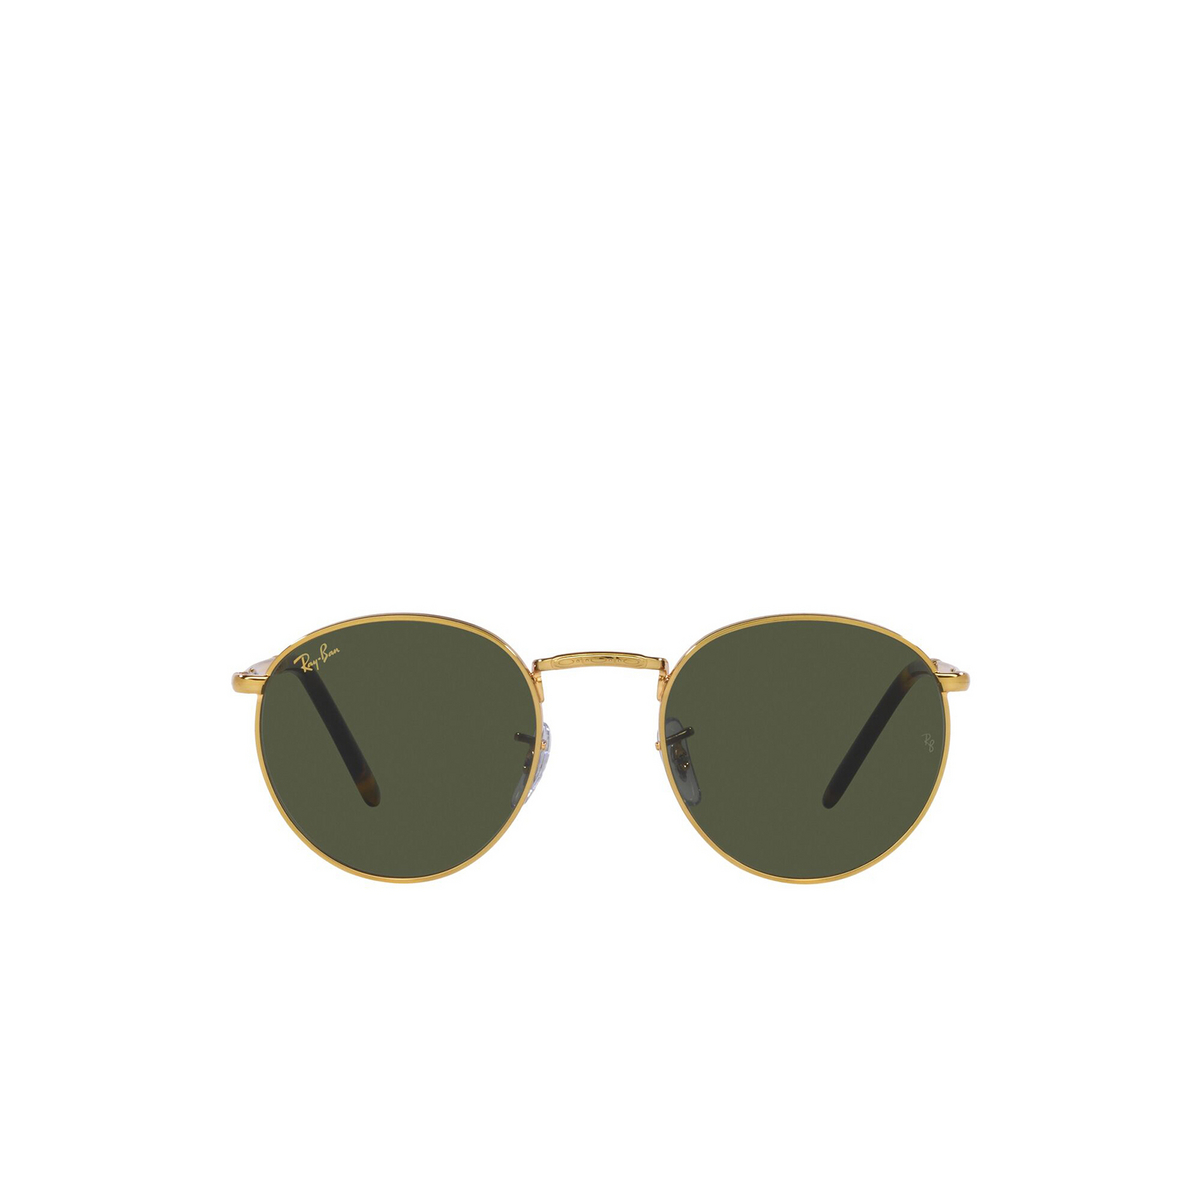 Ray-Ban NEW ROUND Sunglasses 919631 Legend Gold - front view